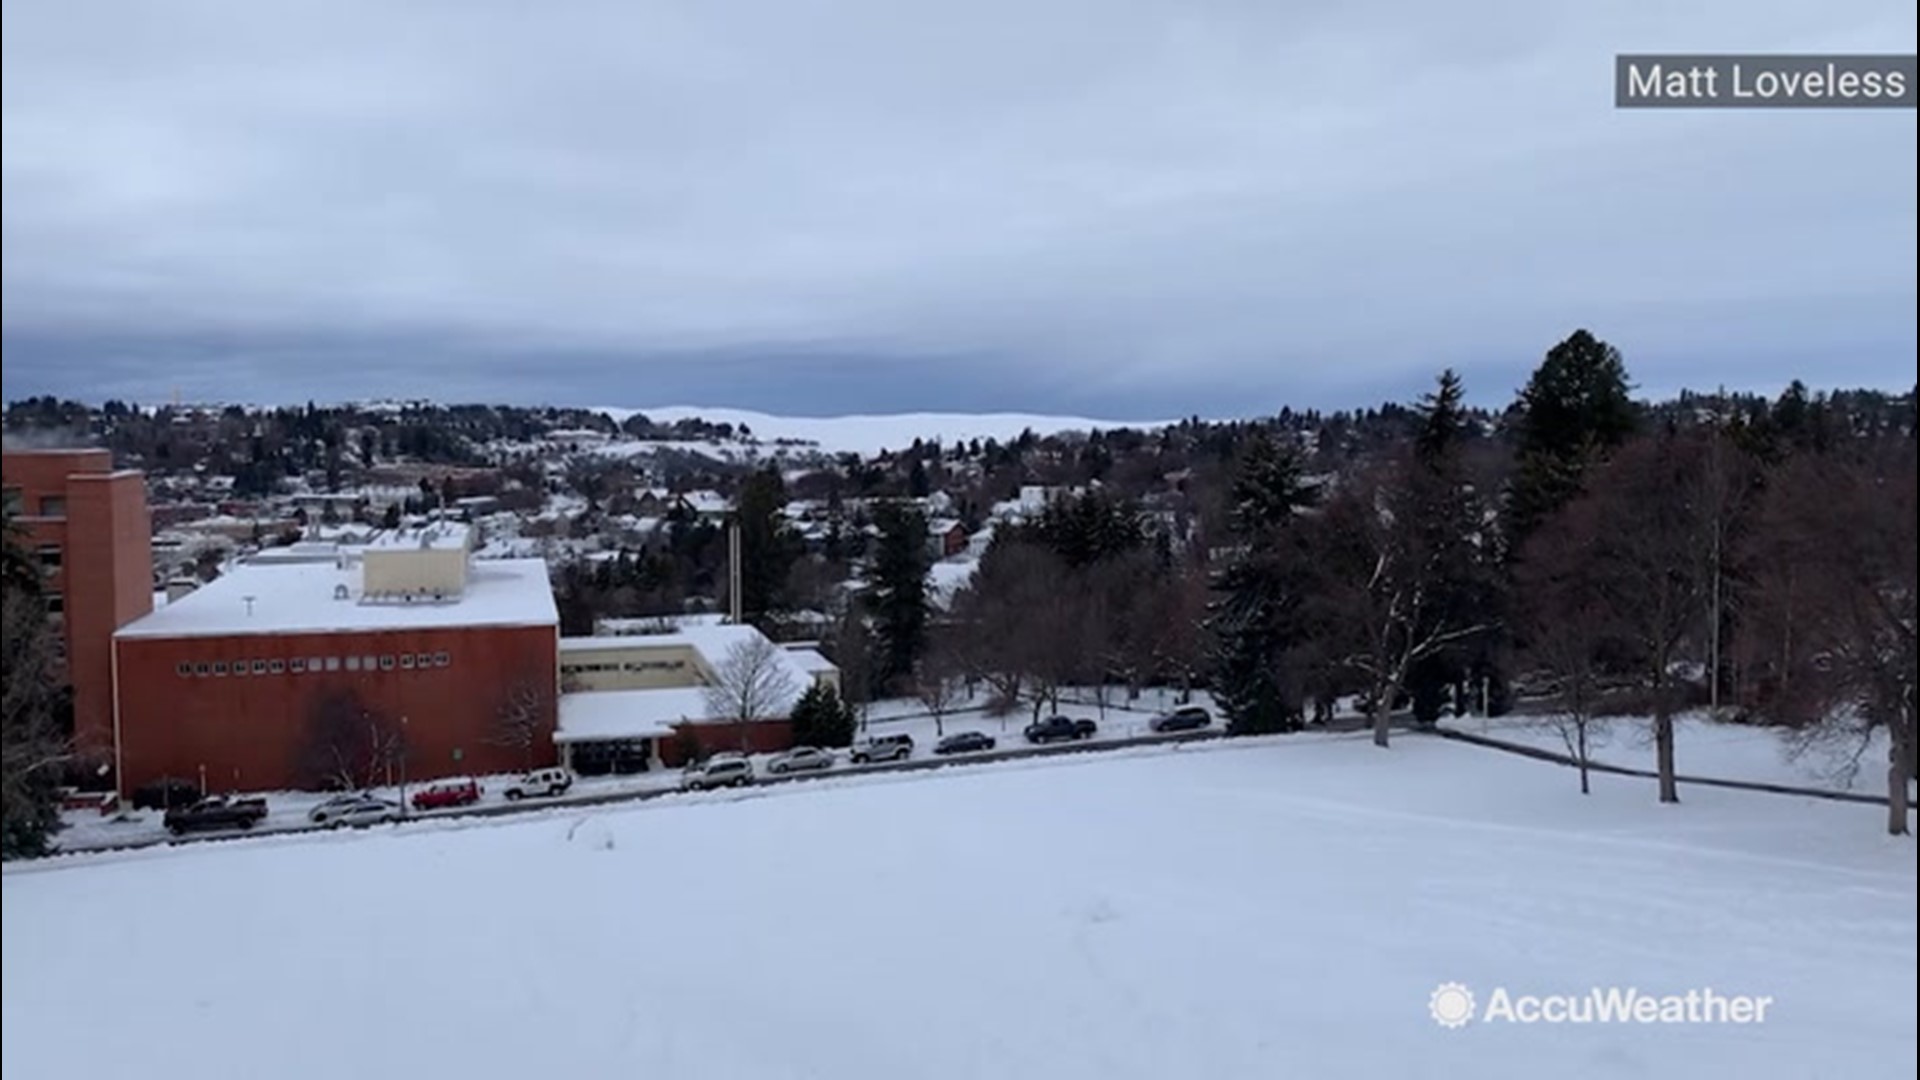 Pullman, Washington, was covered in snow after a strong storm on Jan. 13.